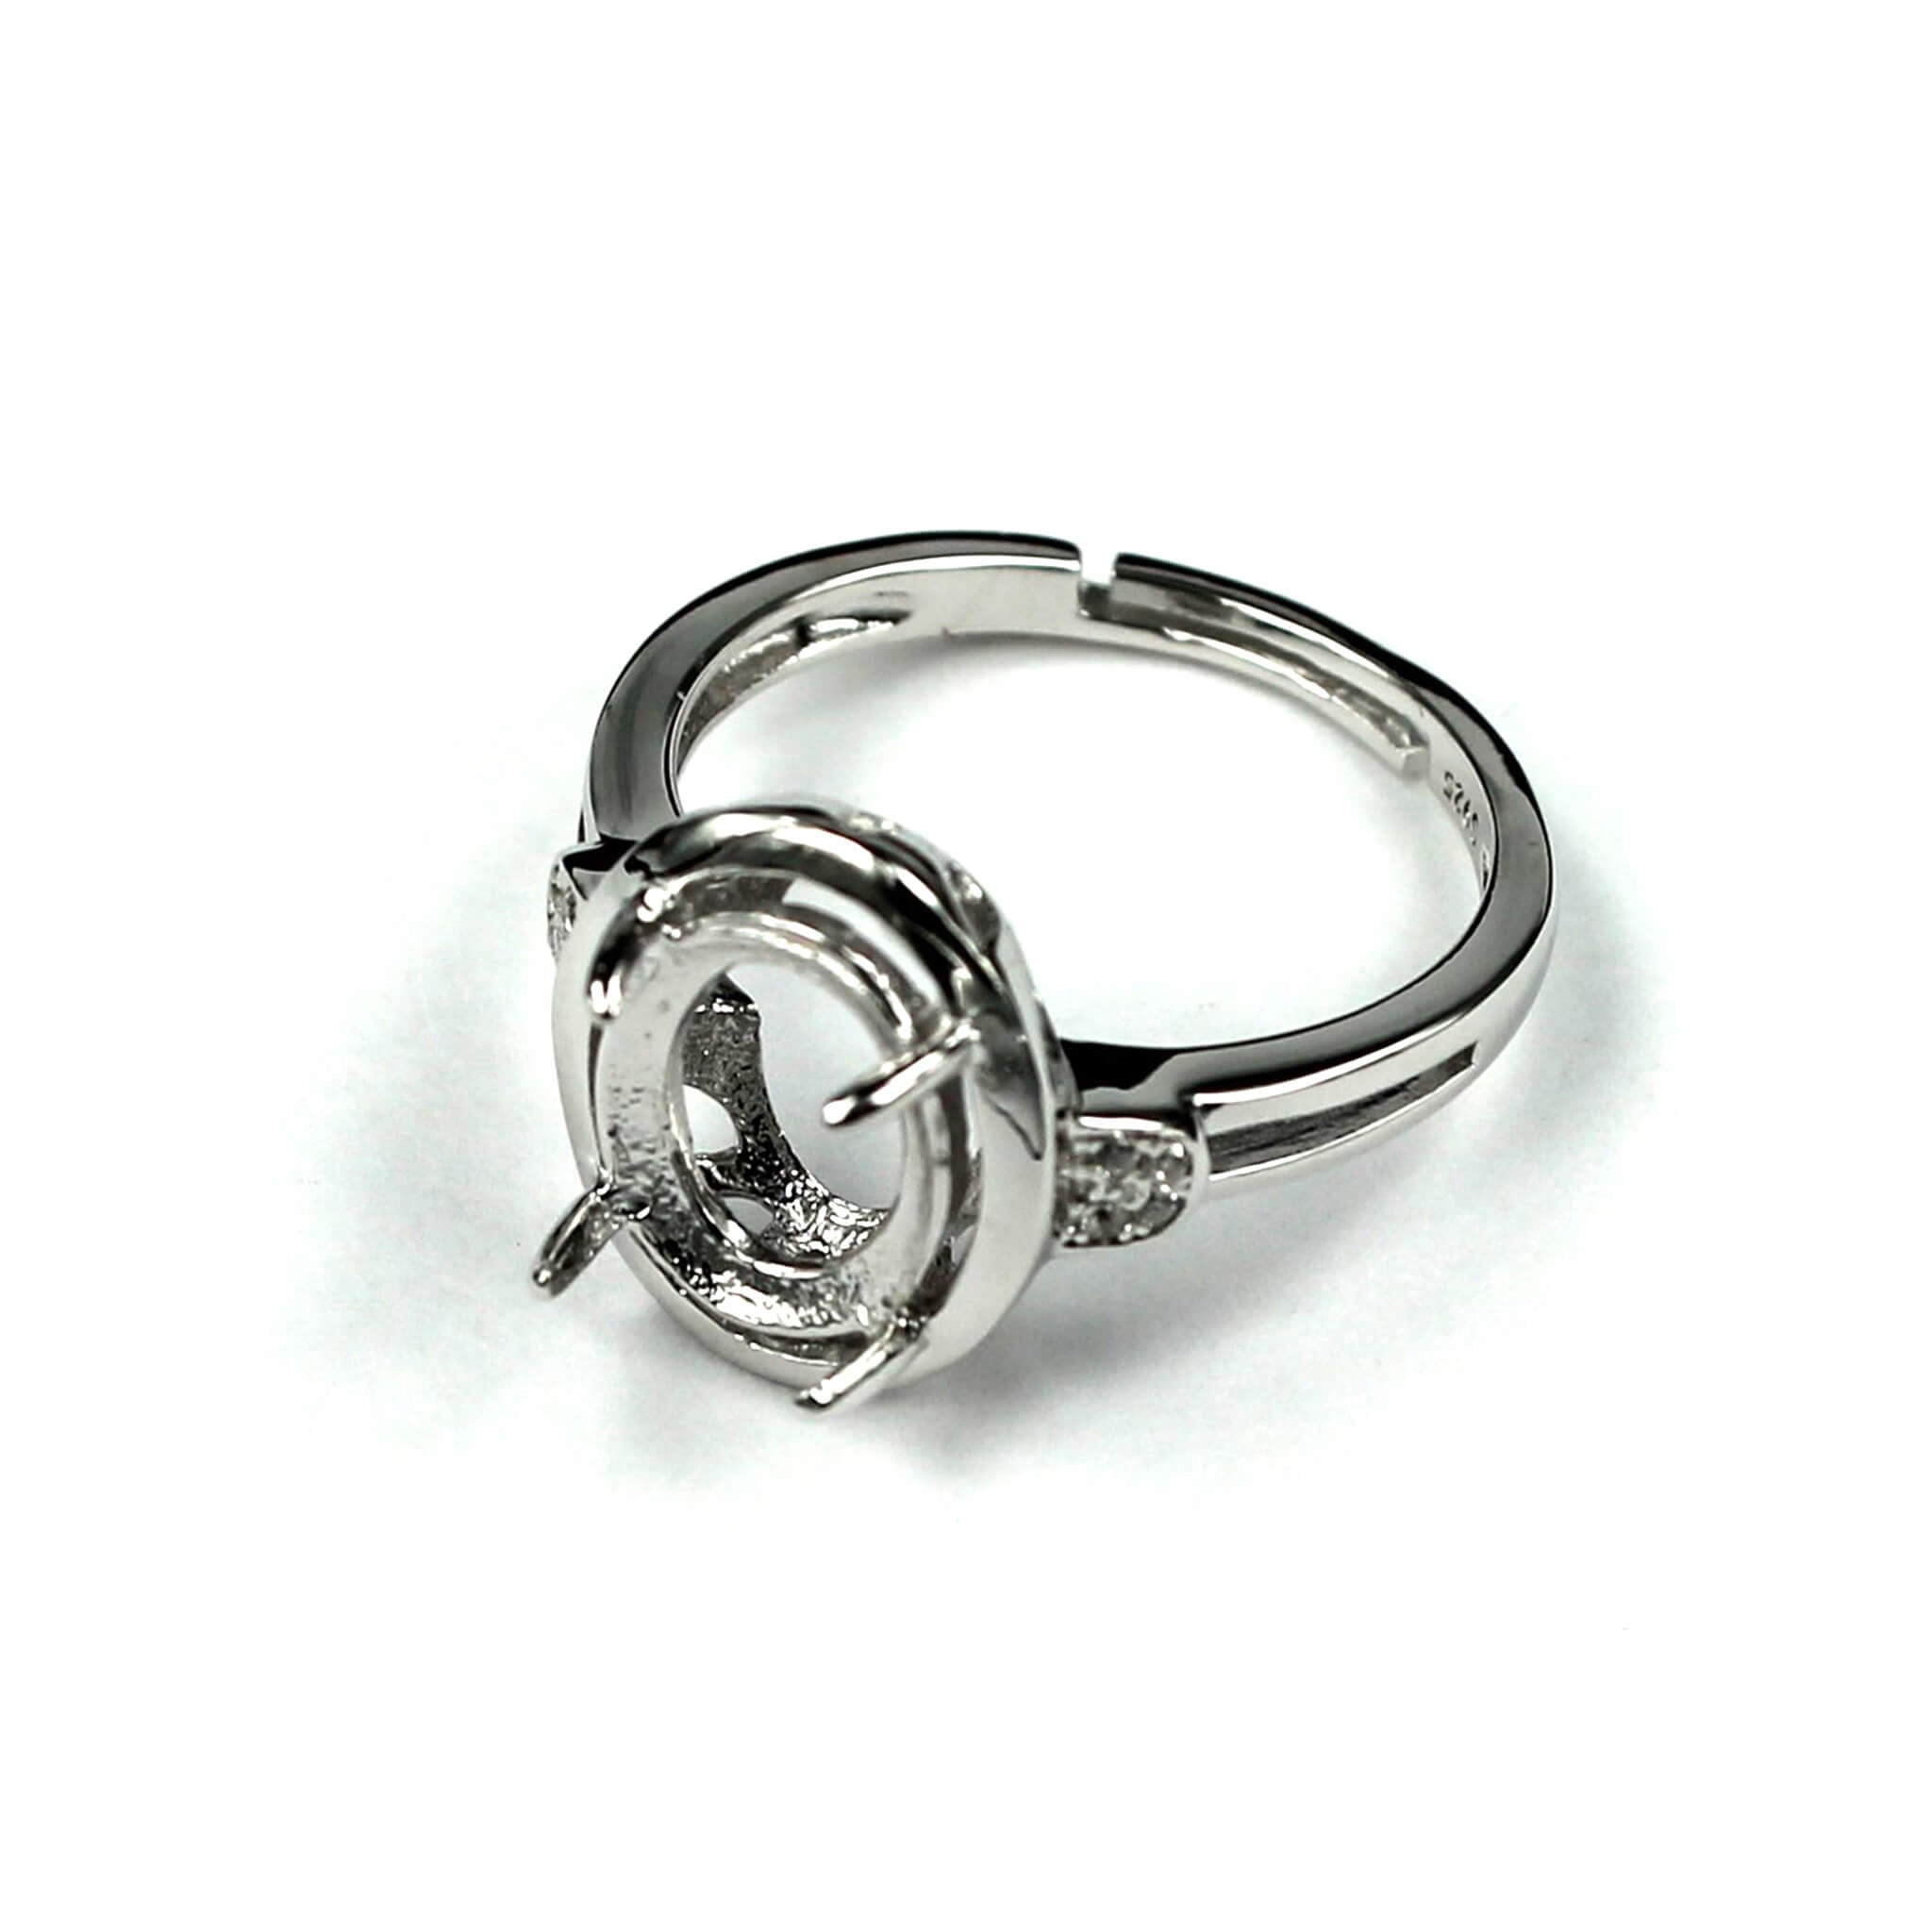 Adjustable Ring with Oval Prongs Mounting in Sterling Silver 7x9mm